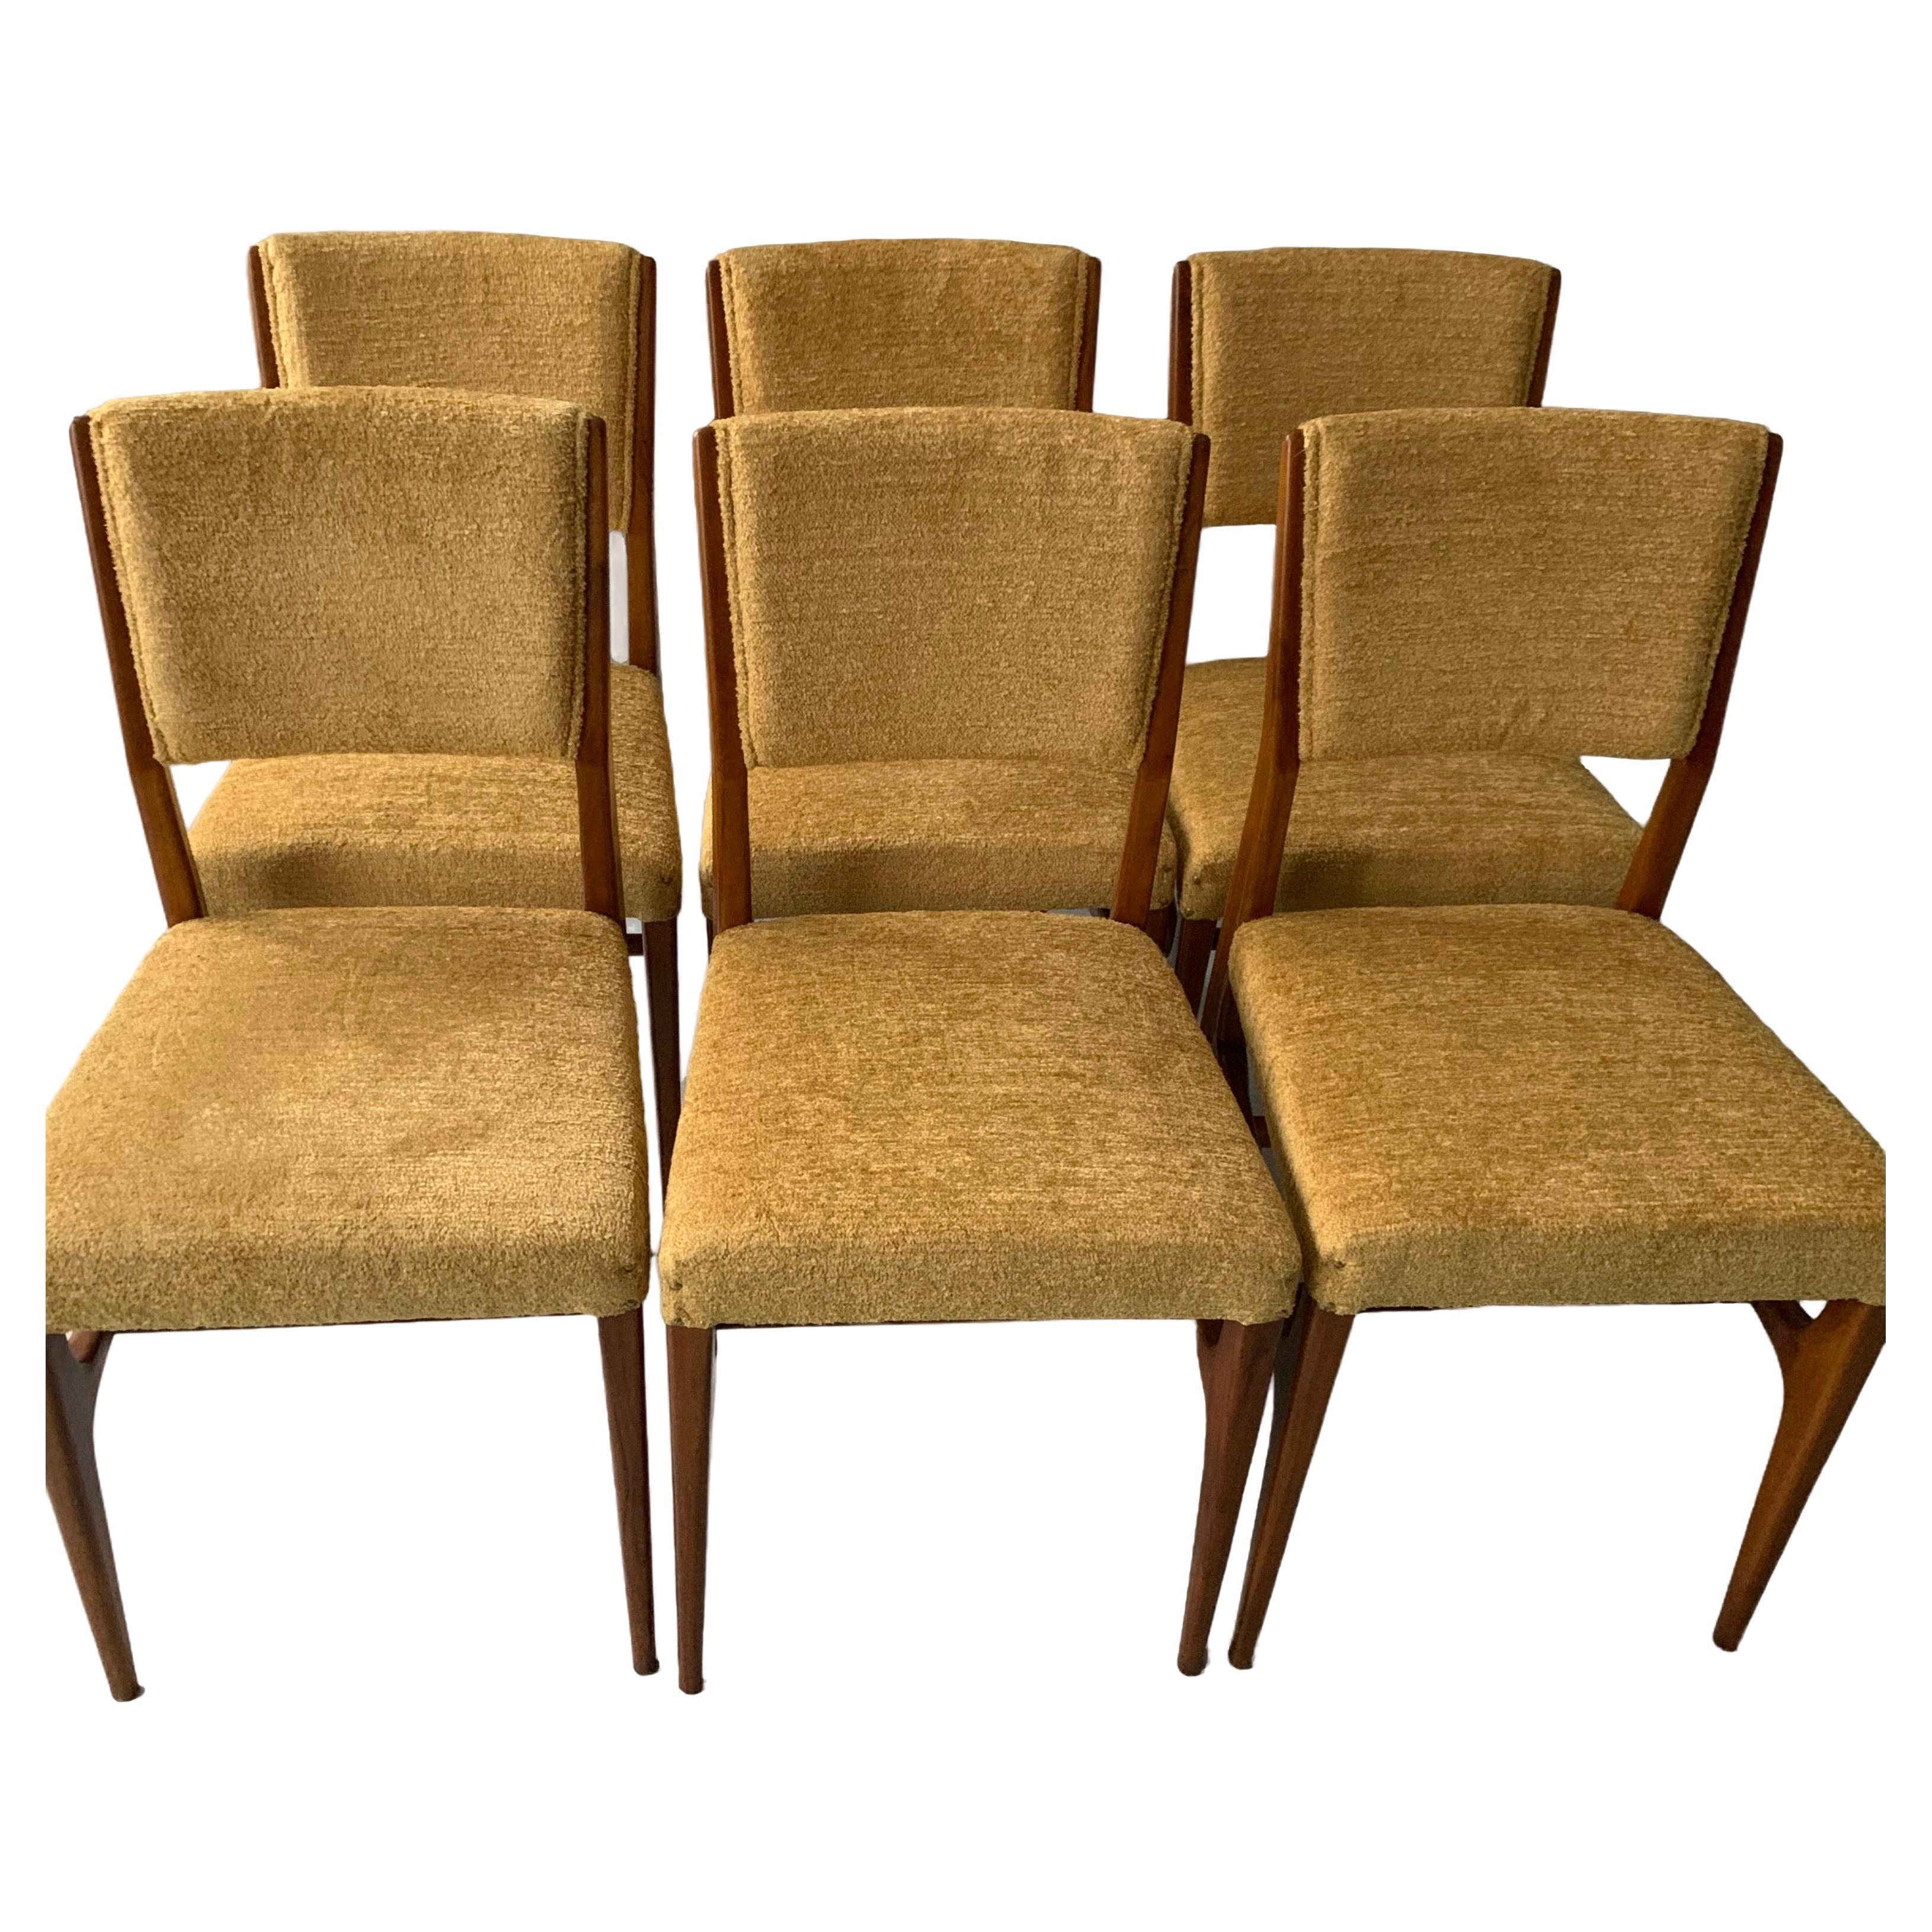 A rare set of Gio Ponti dining chairs. For Sale